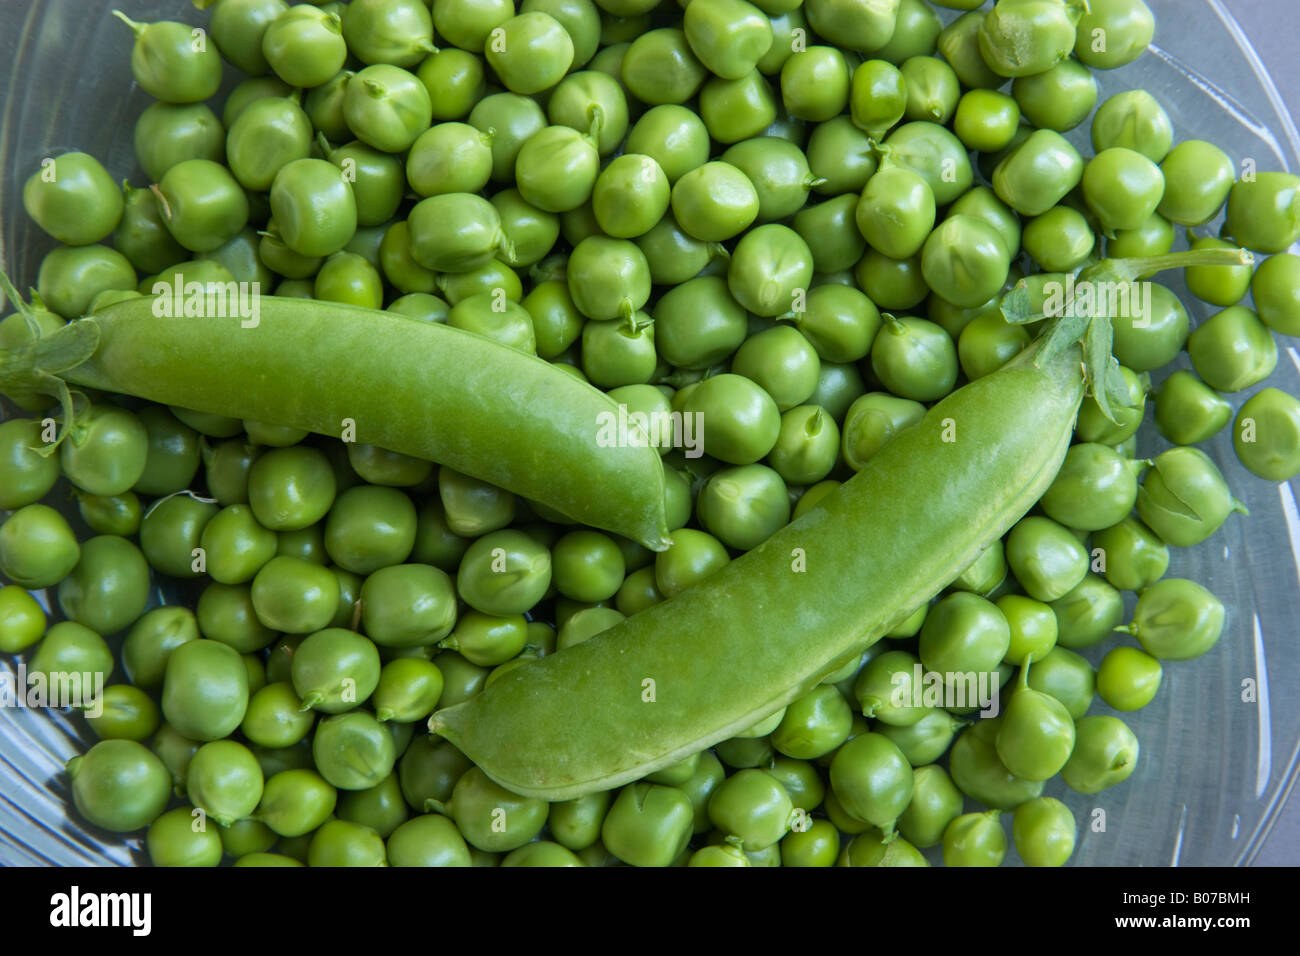 Shelled peas with pods on glass plate. Stock Photo